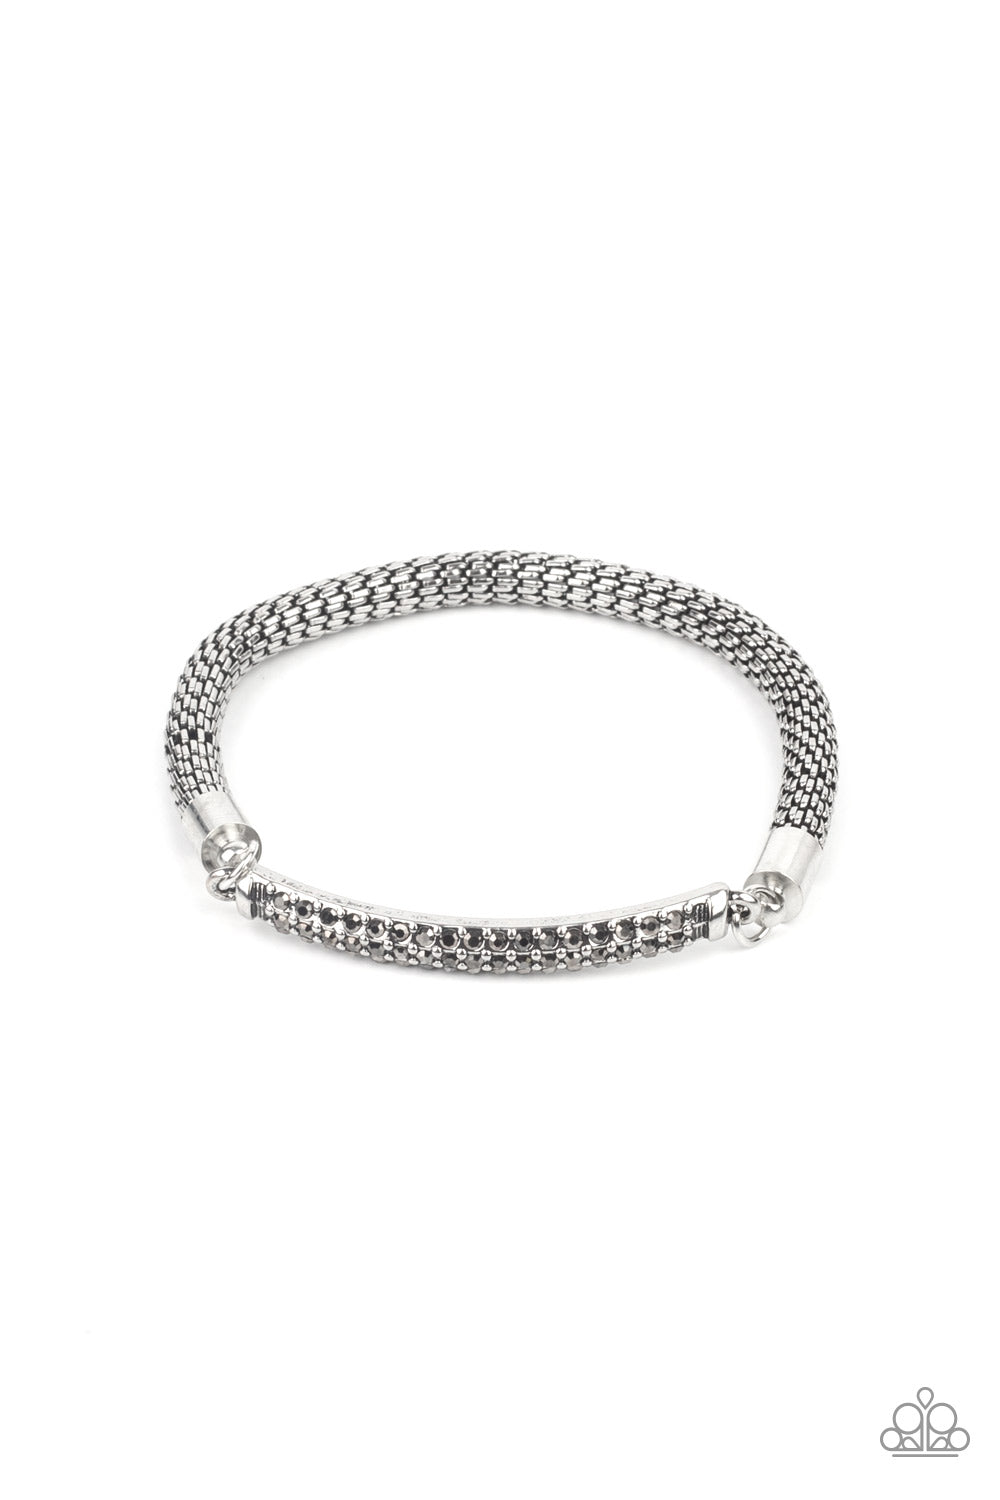 Paparazzi Bracelets - Fearlessly Unfiltered - Silver